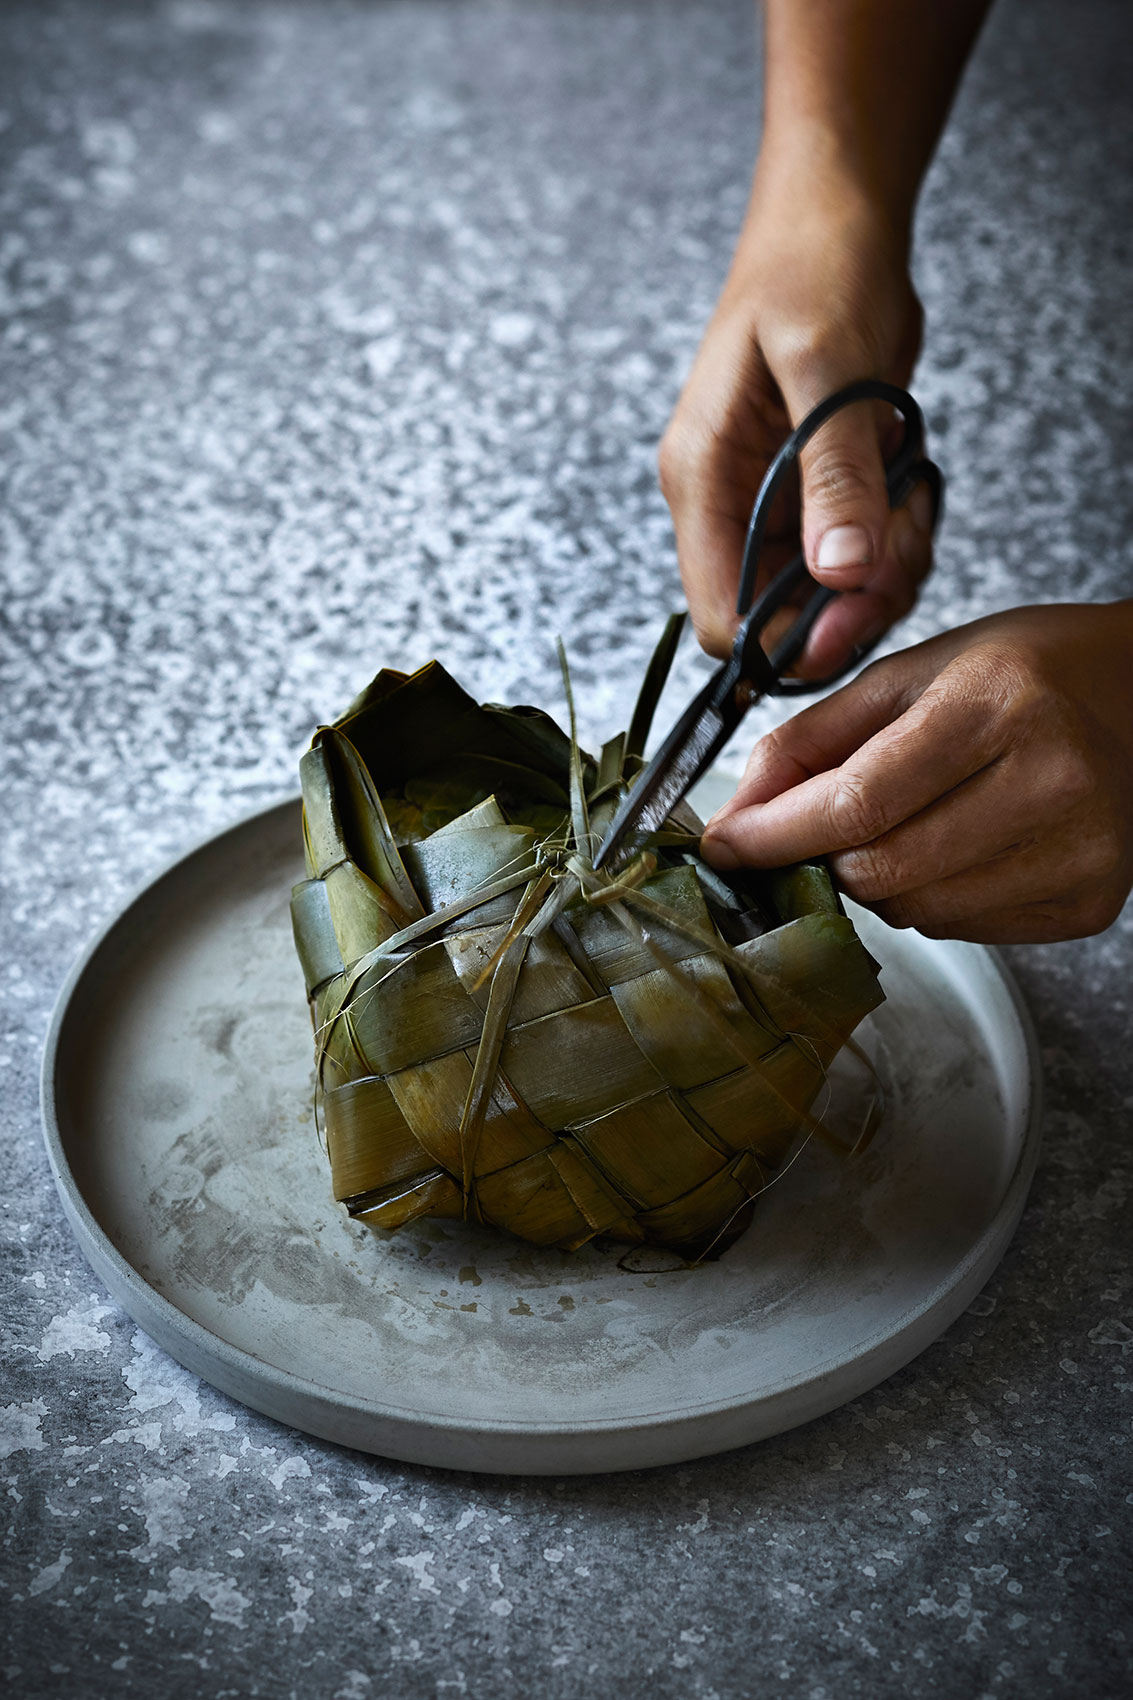 Hiakai • Cutting Open Steamed Flax Basket with Scissors • Lifestyle & Hospitality Food Photography